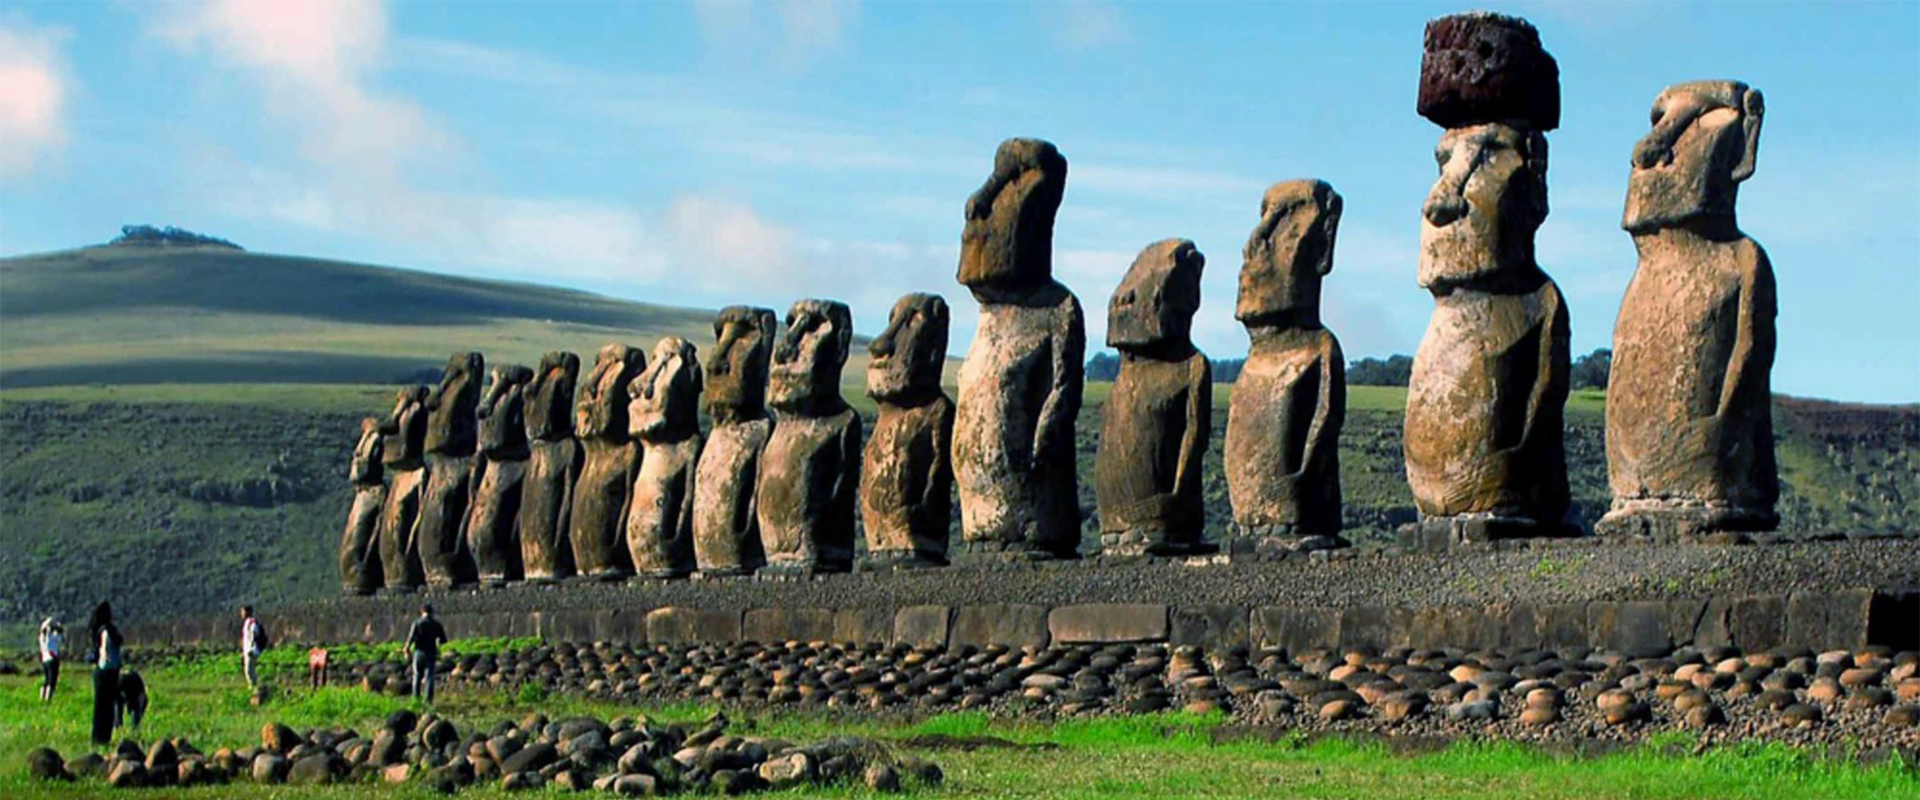 Scientists Finally Discovered the Truth About Easter Island